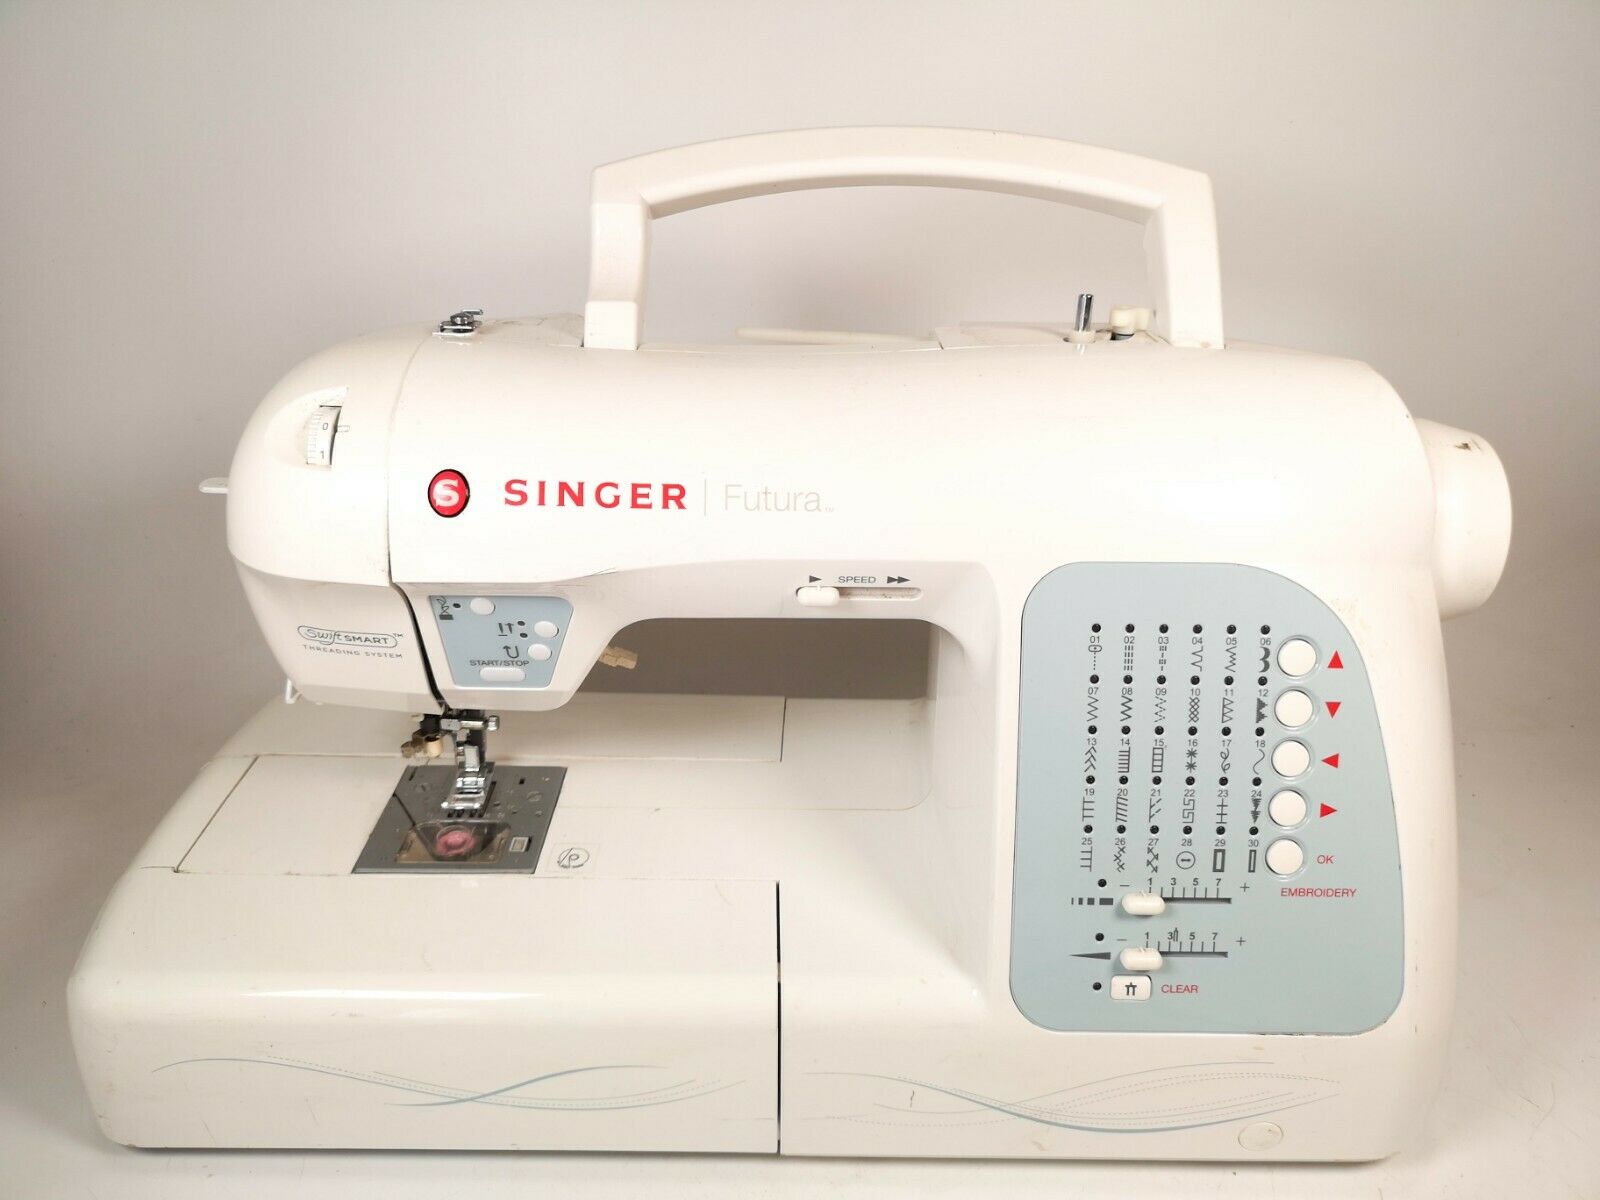 Singer Futura Embroidery Sewing Machine Only Xl 400 Model